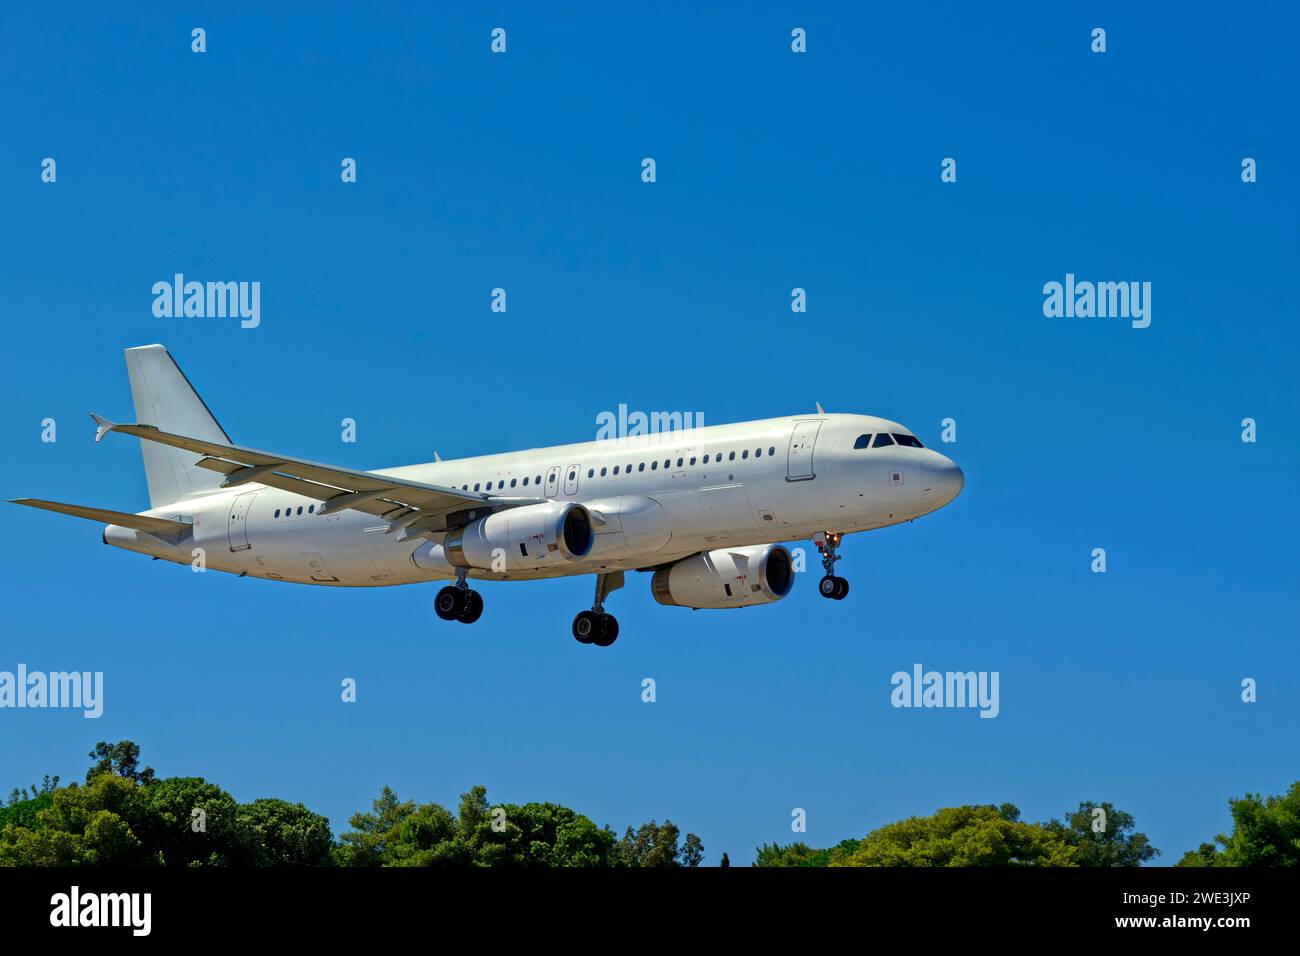 Airbus A320-200 ohne Lackierung. Stockfoto